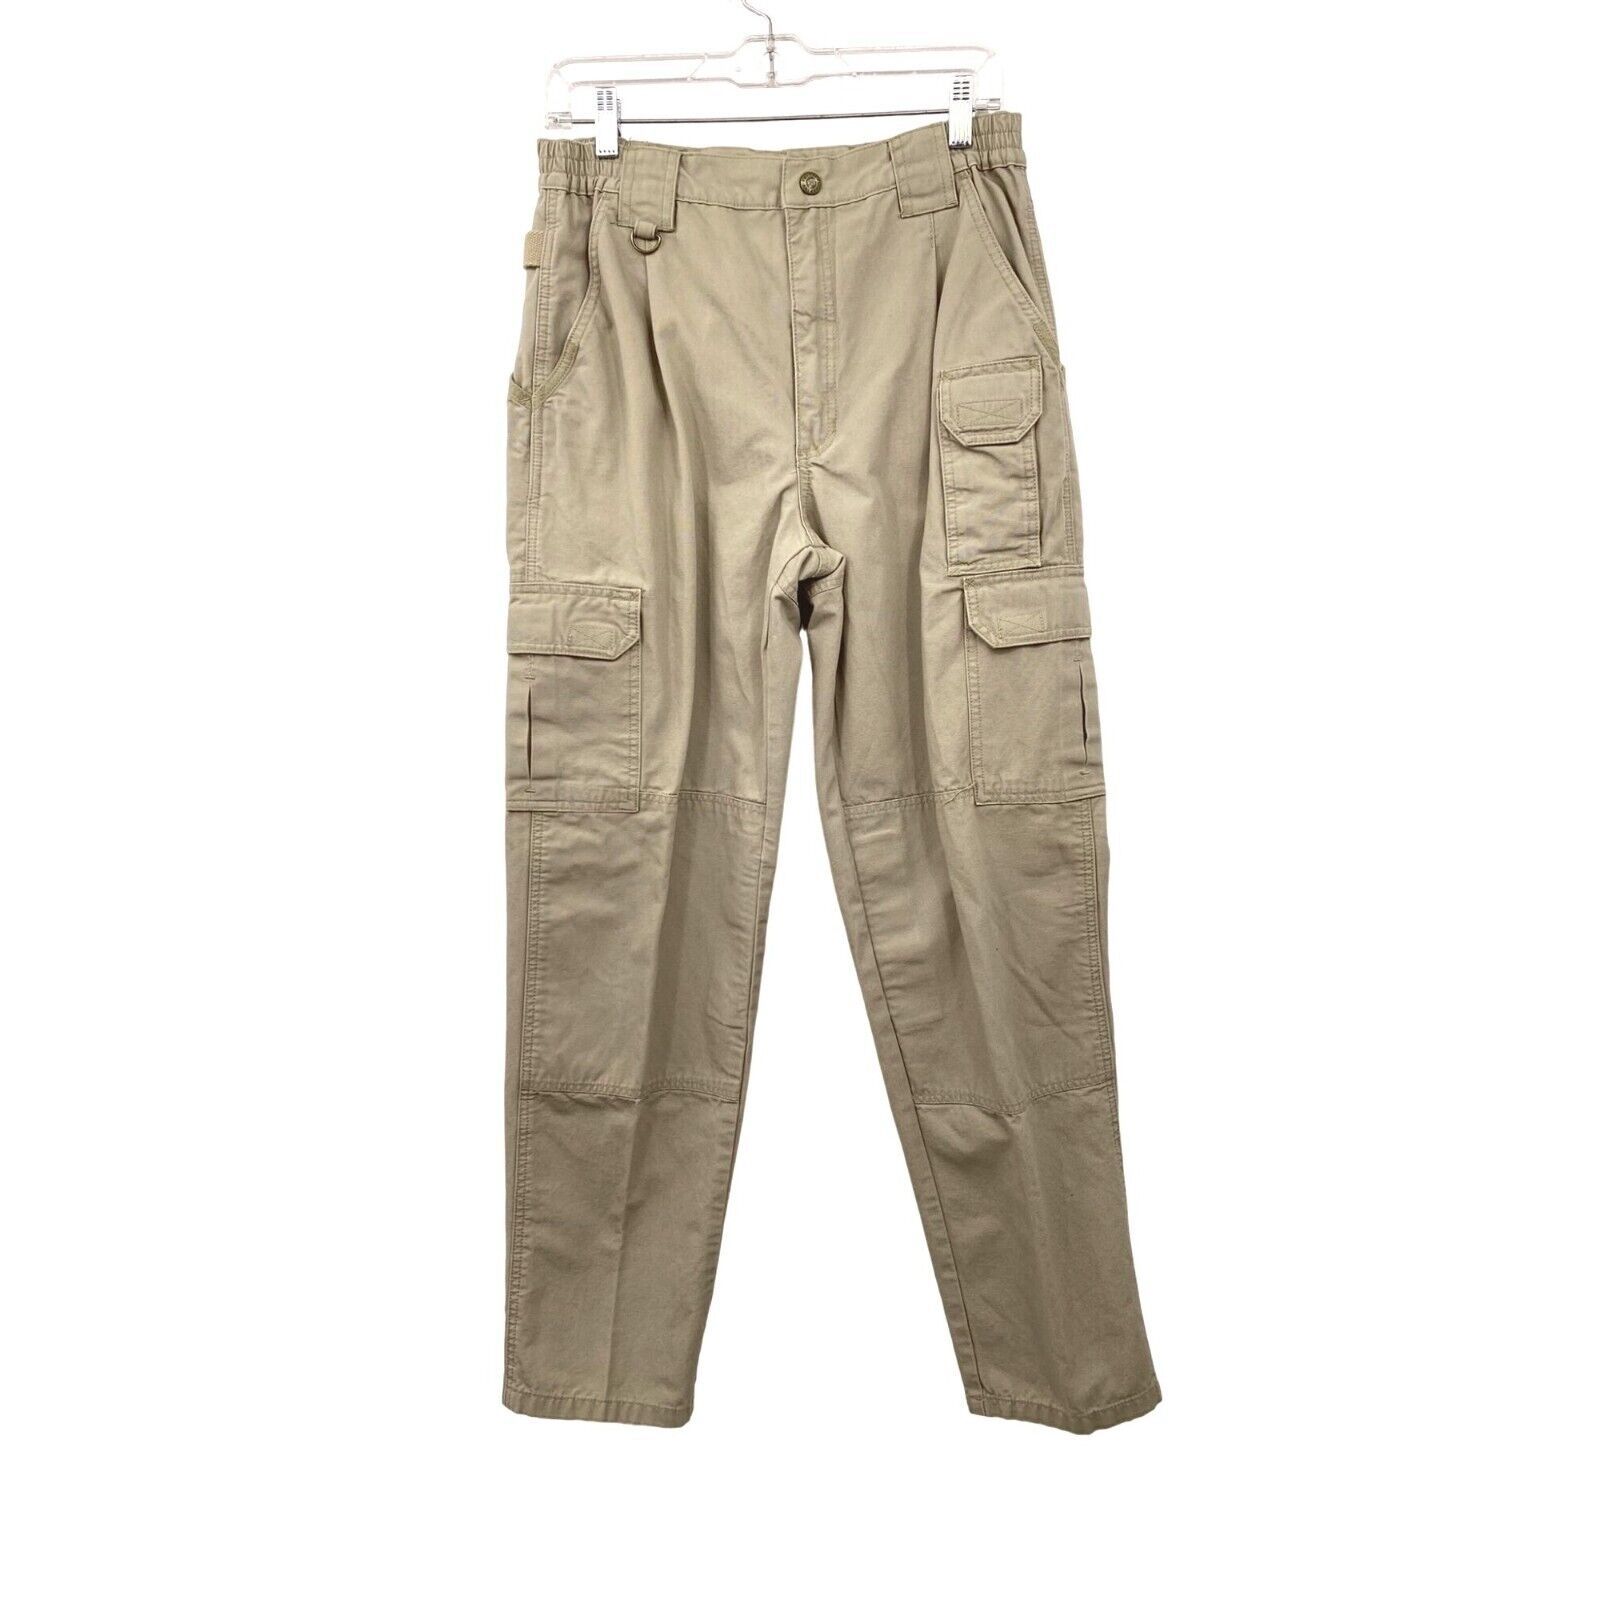 Primary image for 511 Tactical Cargo Pants Womens 10 Used Tan 64355